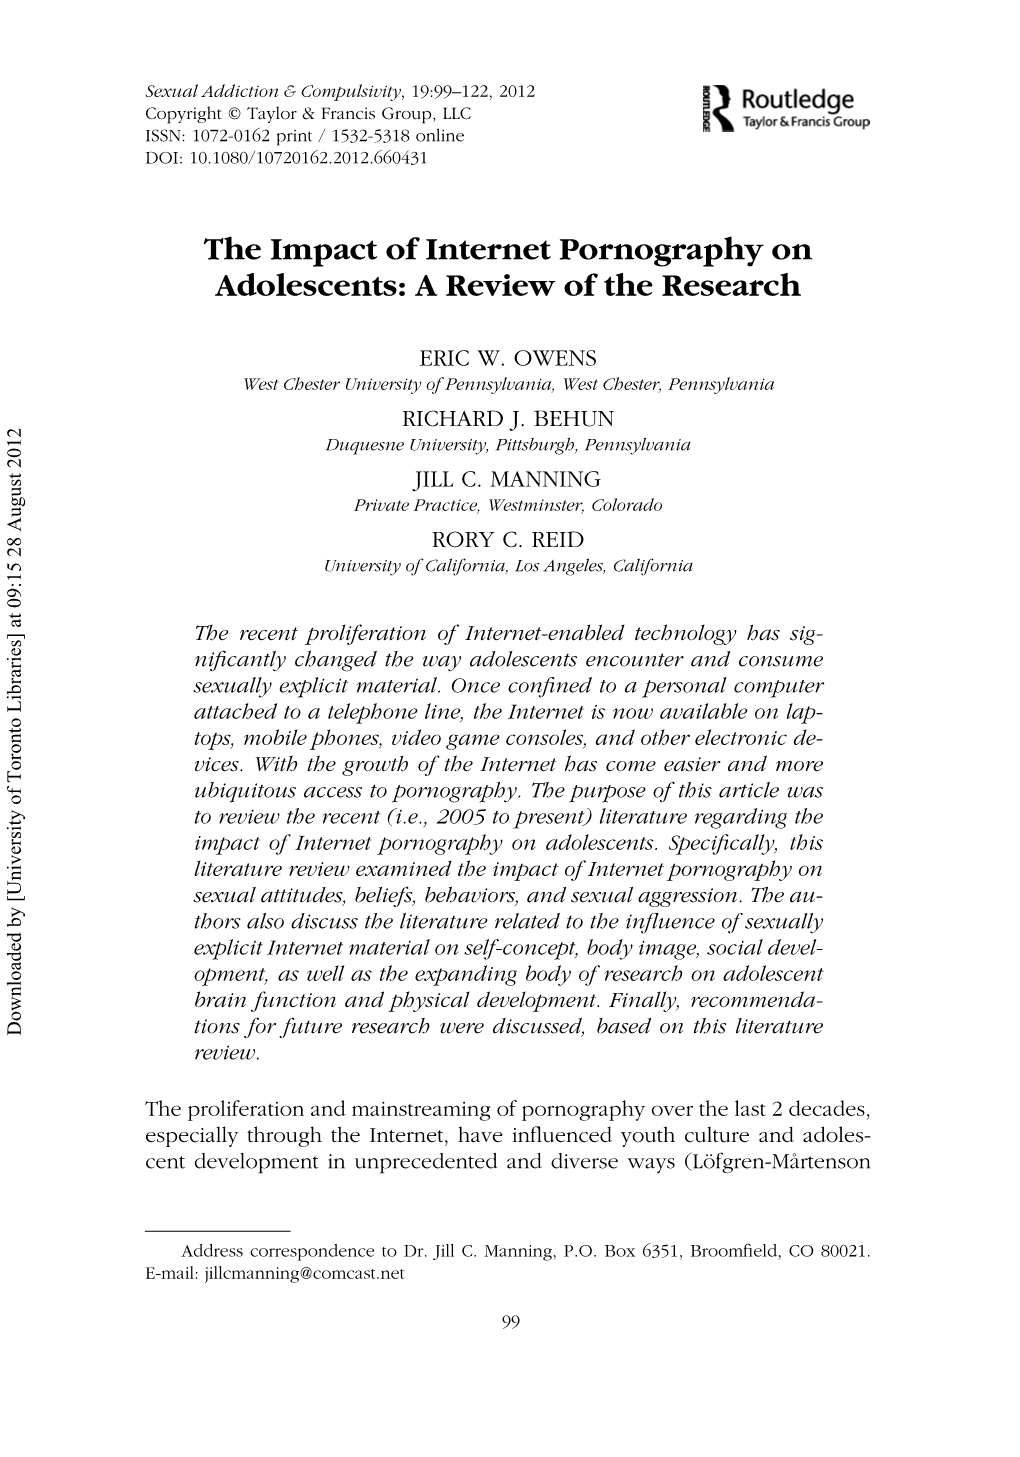 The Impact of Internet Pornography on Adolescents: a Review of the Research